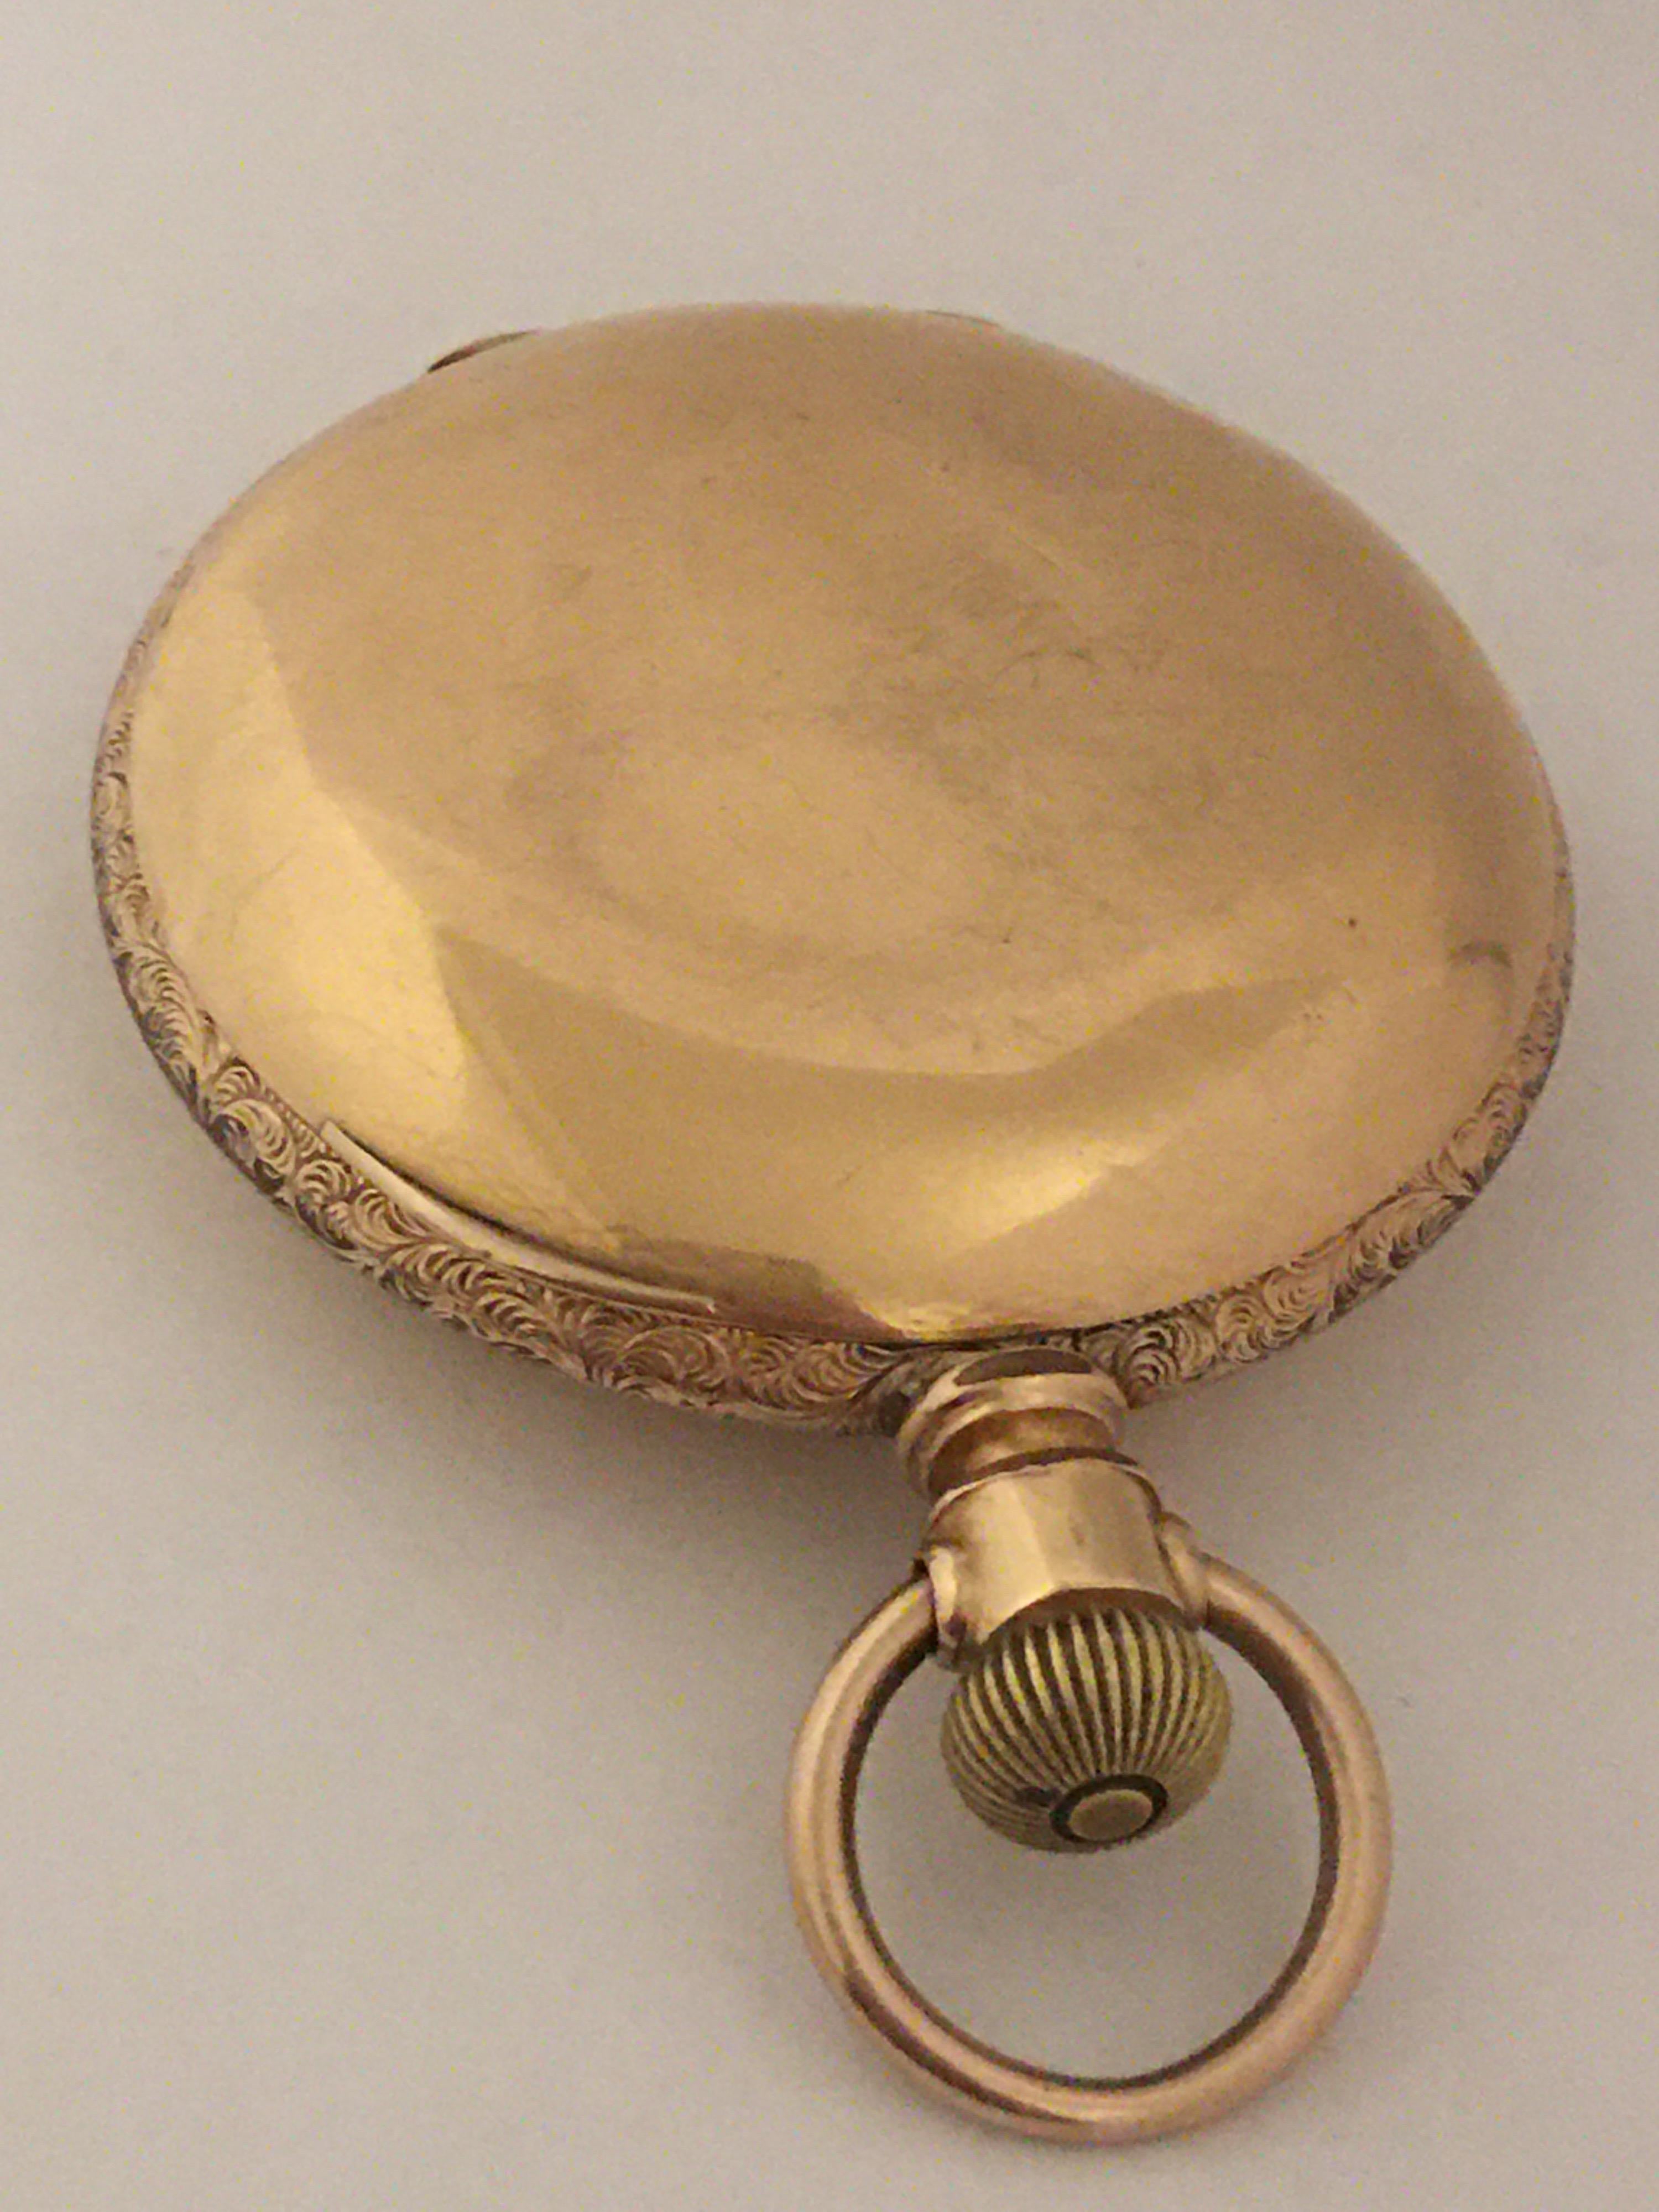 14K Gold-Filled Full Hunter American Waltham Watch Co.Antique Gents Pocket Watch 7